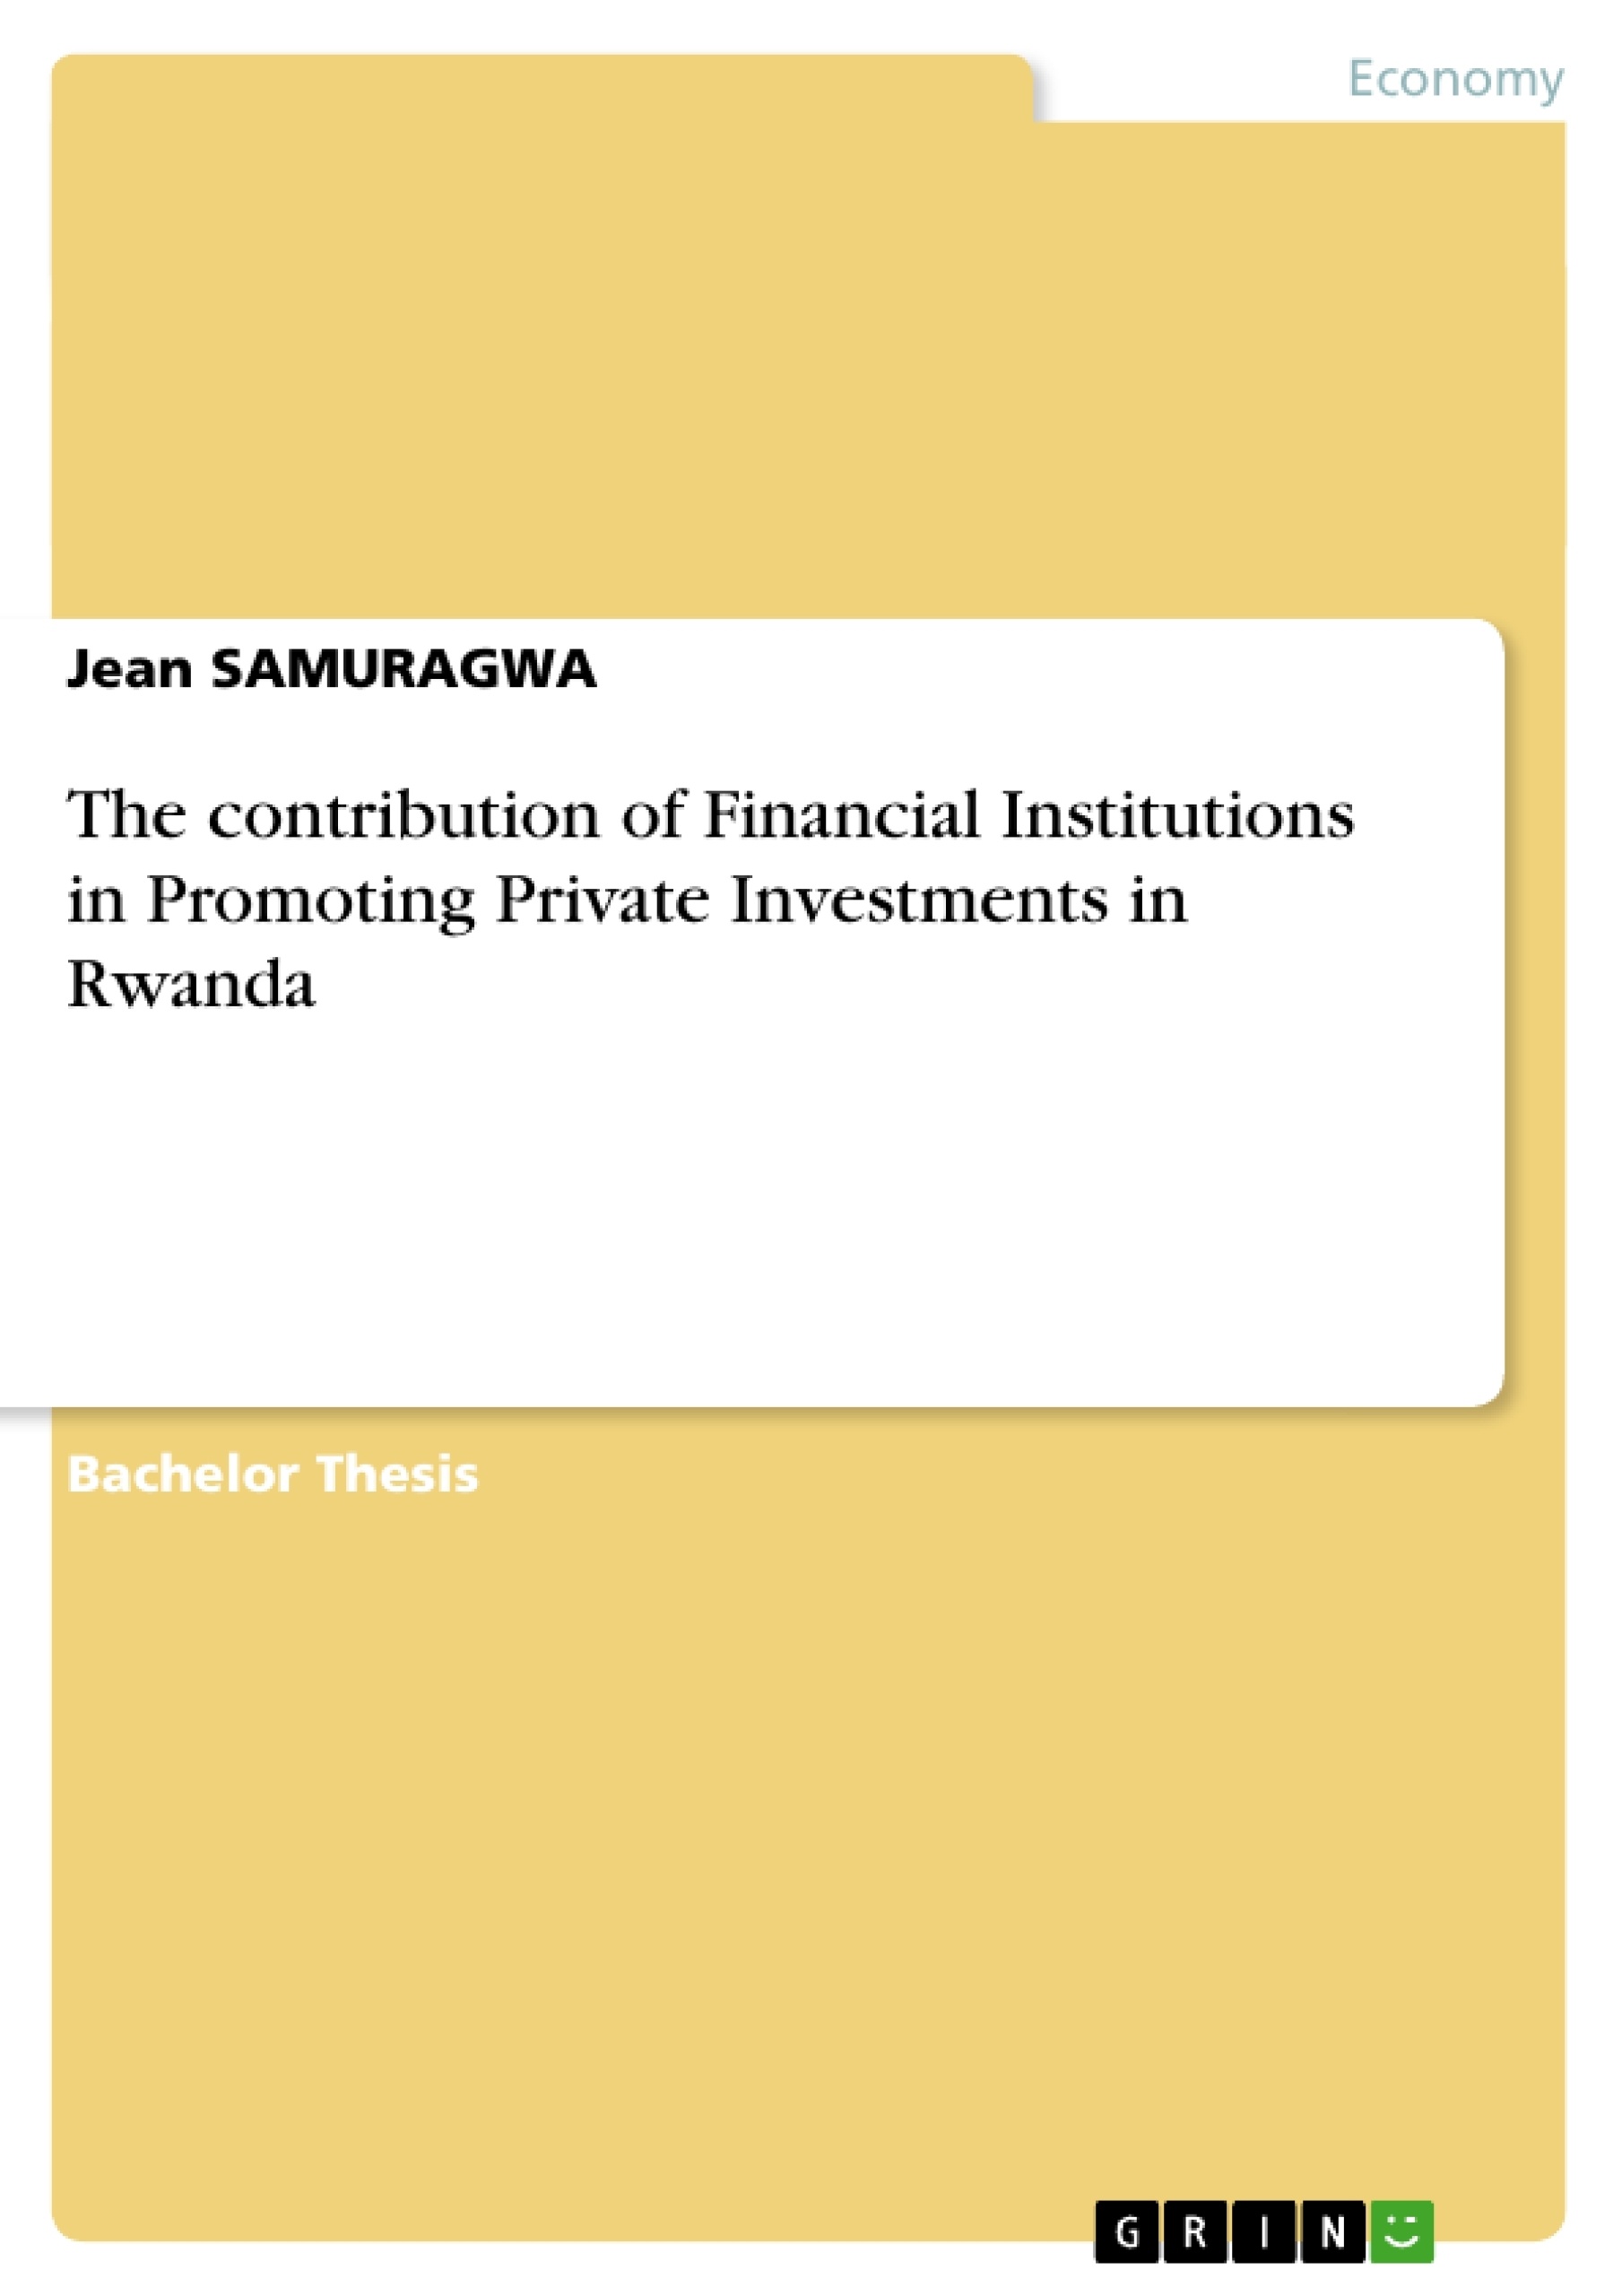 Título: The contribution of Financial Institutions in Promoting Private Investments in Rwanda